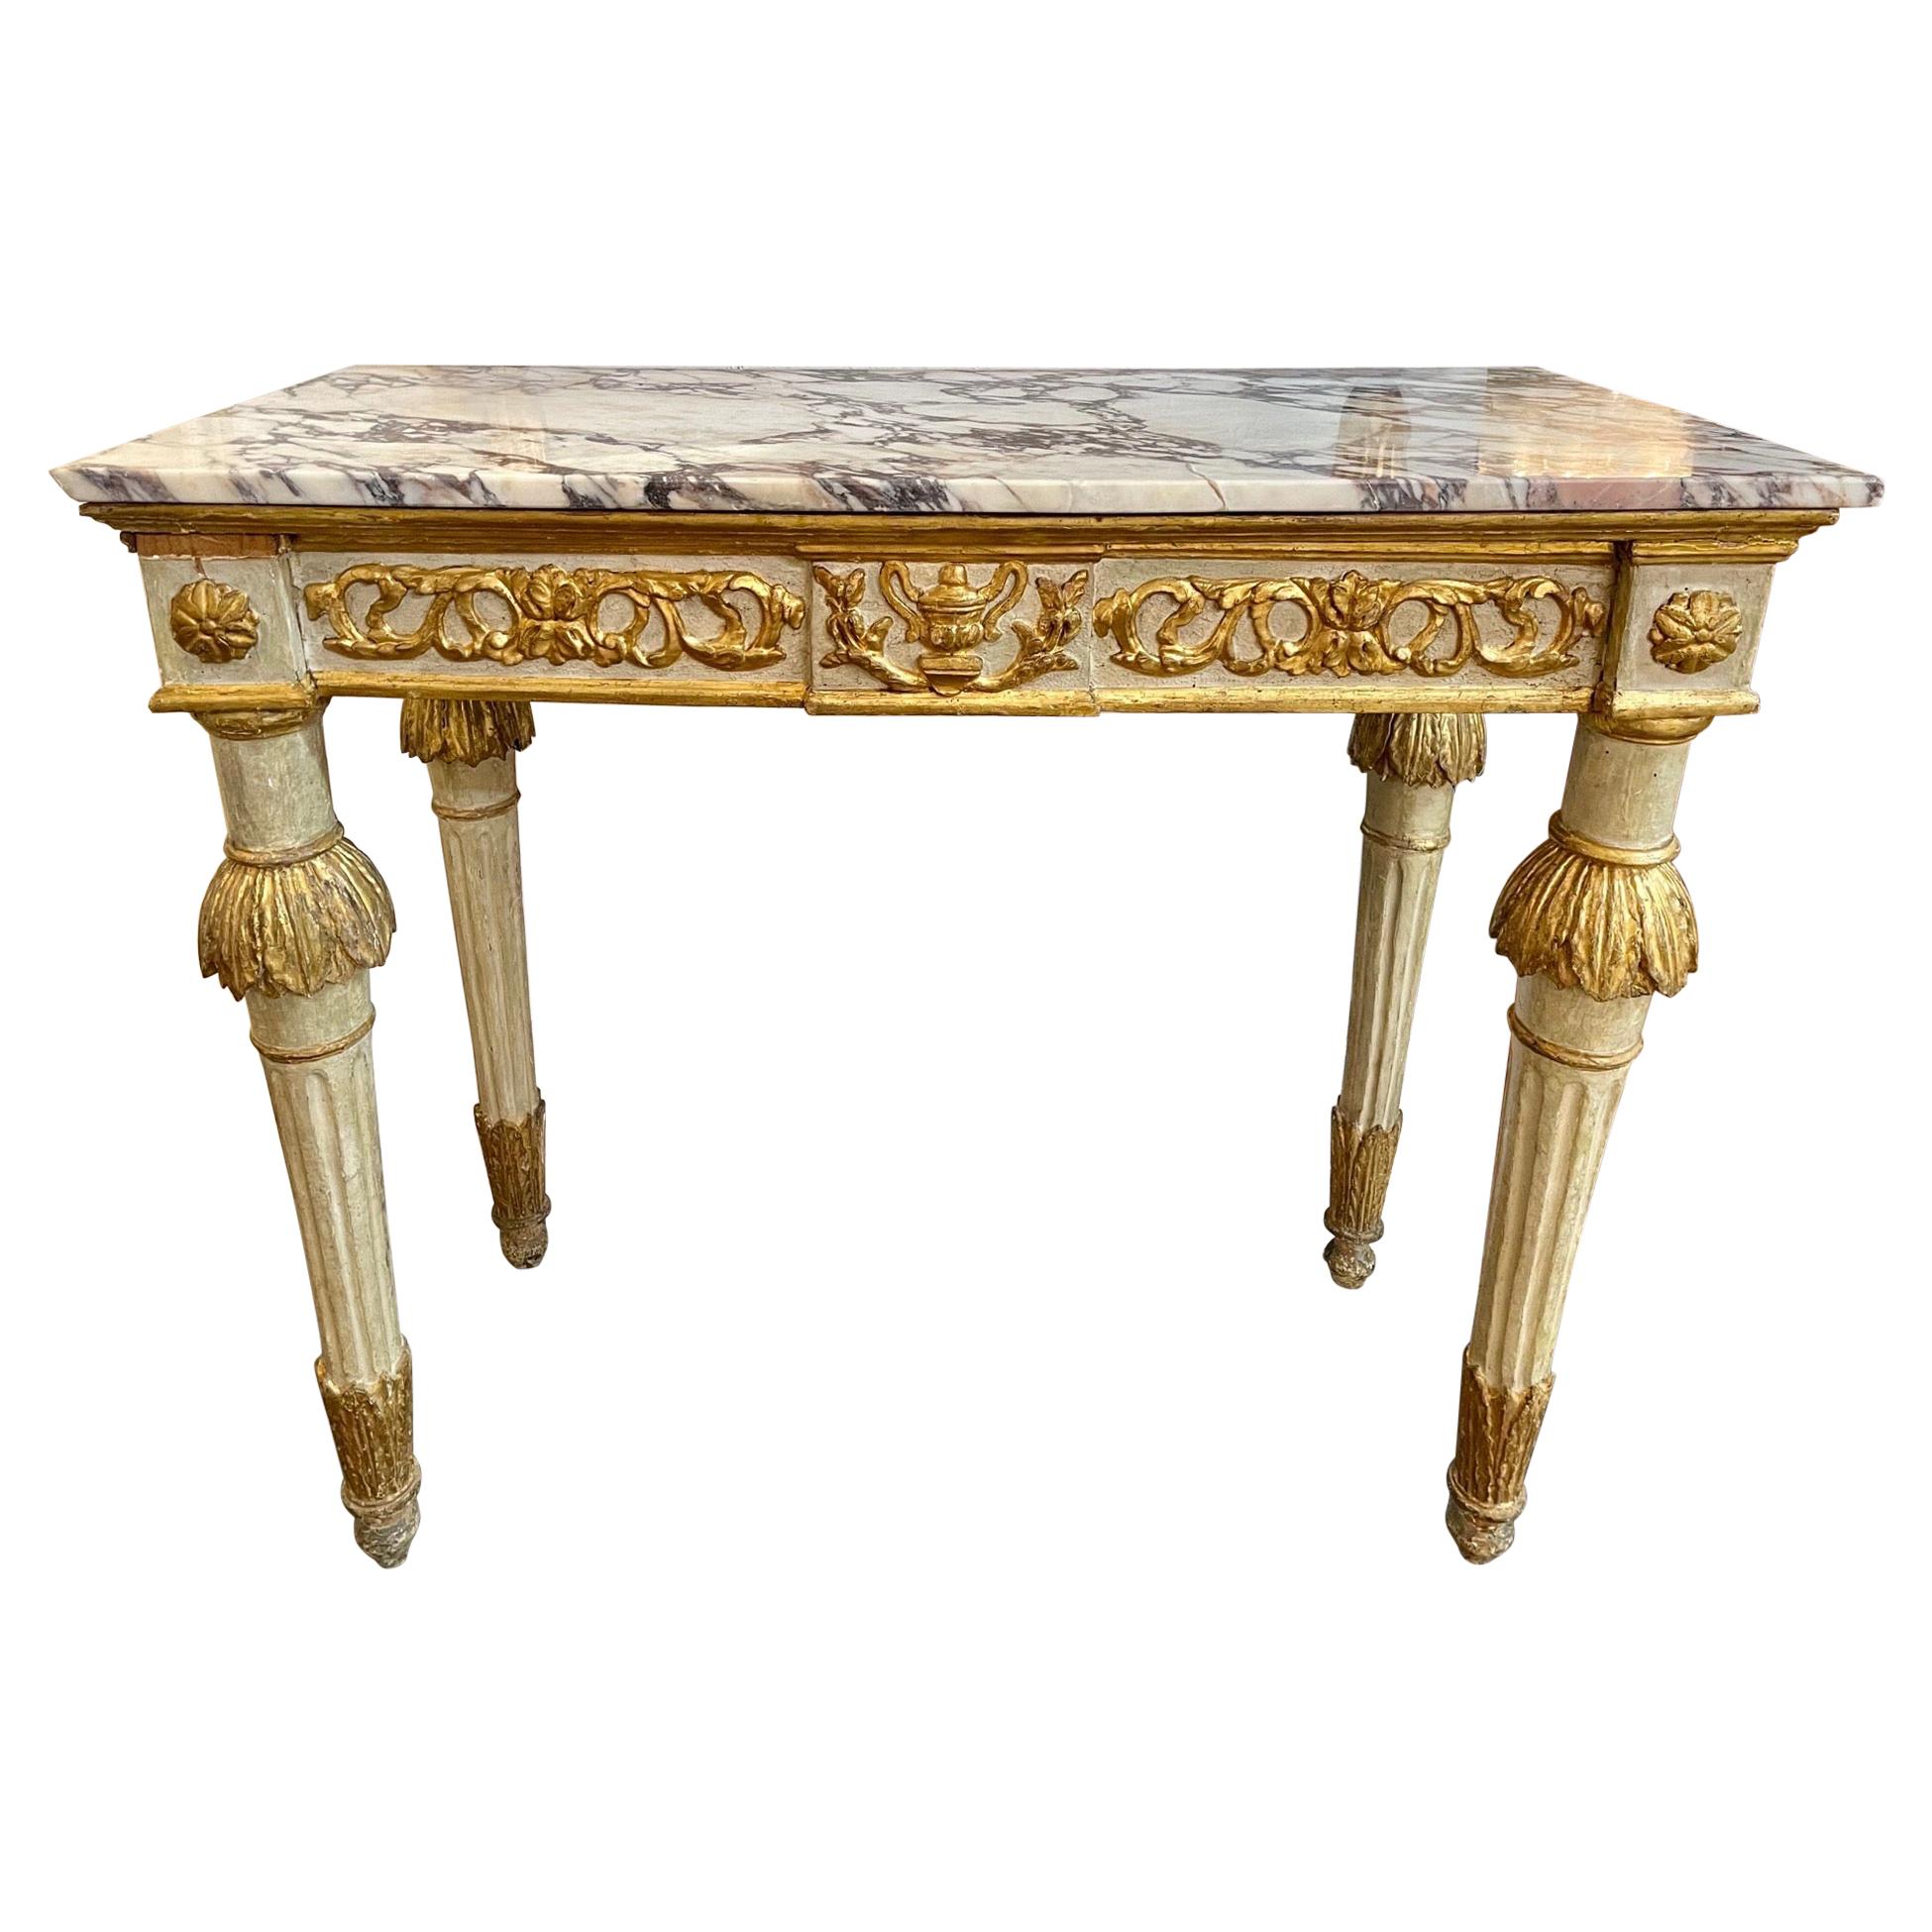 18th Century Italian Carved and Parcel Gilt Neoclassical Console